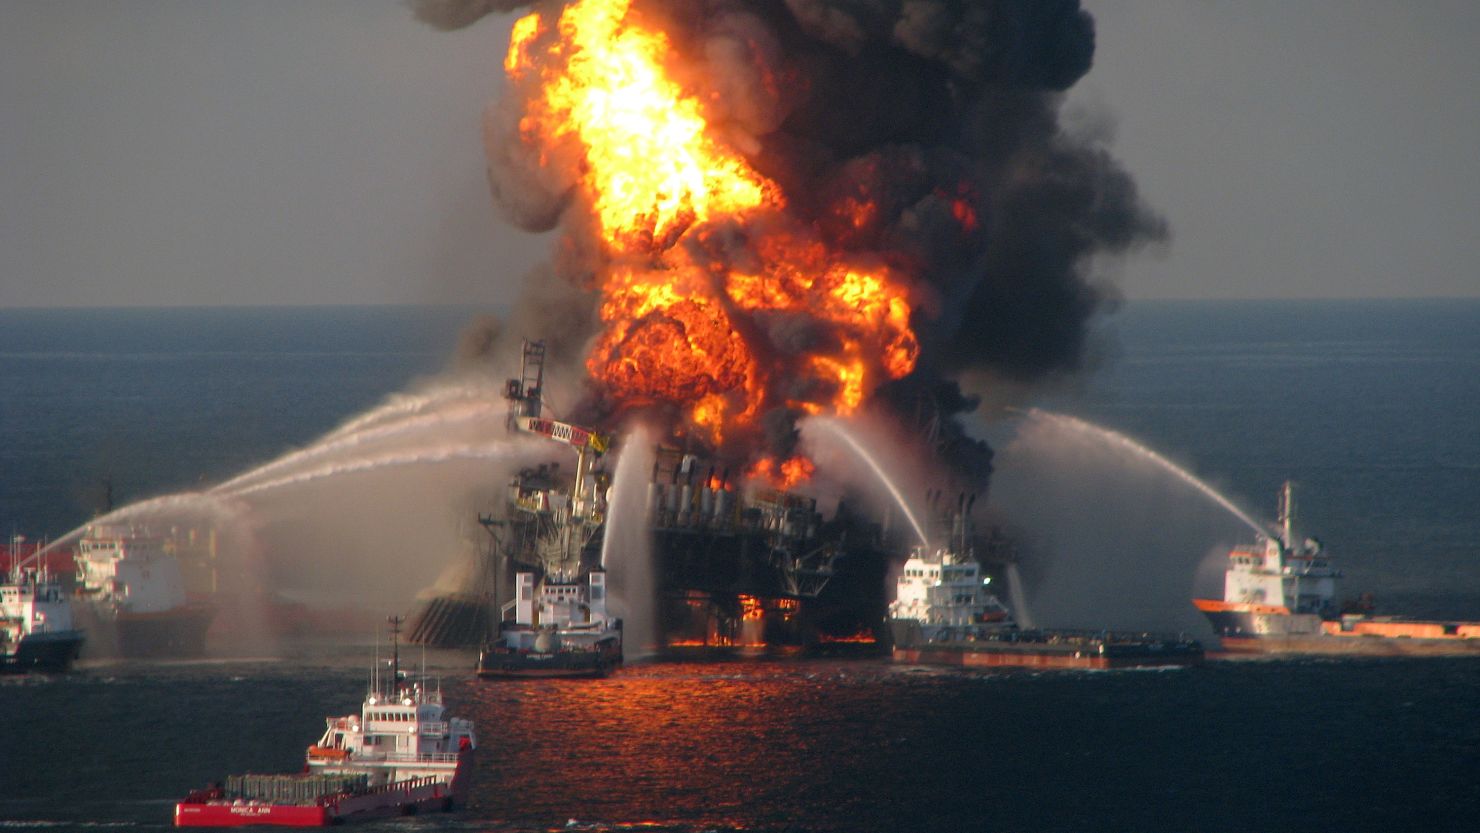 The explosion on the Deepwater Horizon on April 21, 2010, killed 11 people and led to more than 200 million gallons of oil being released into the Gulf of Mexico. 